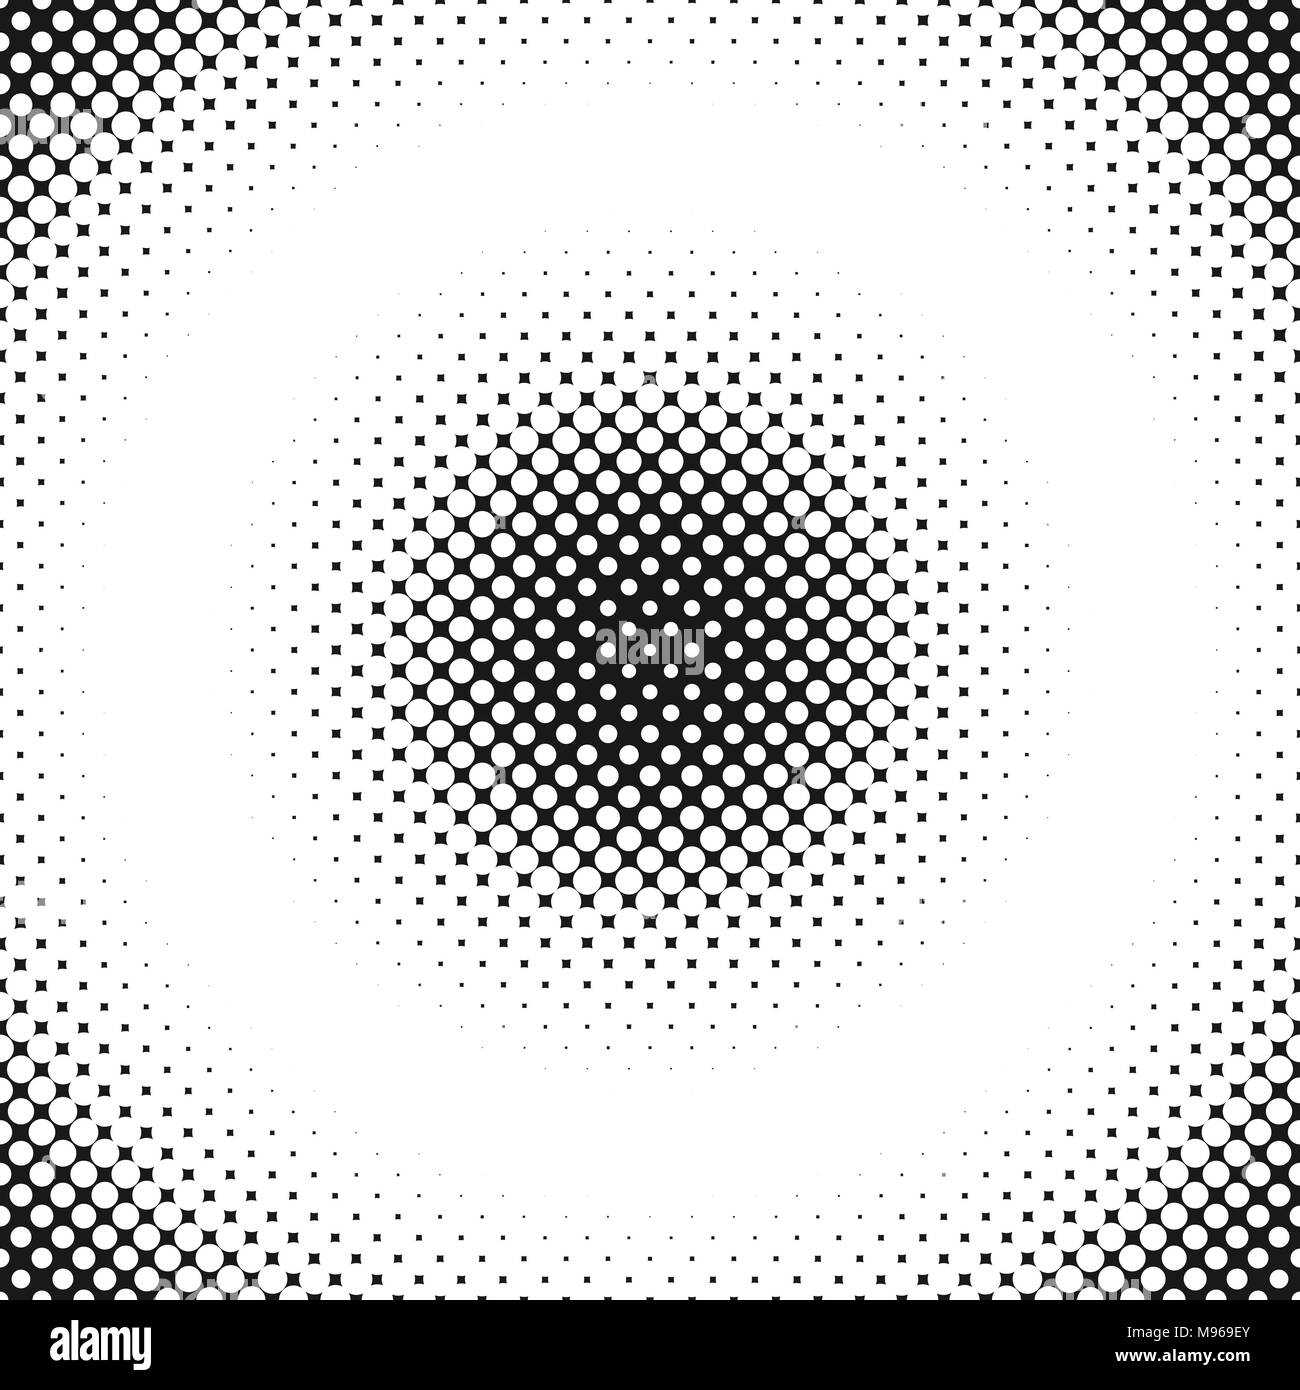 Retro abstract halftone dot pattern background from circles Stock Vector